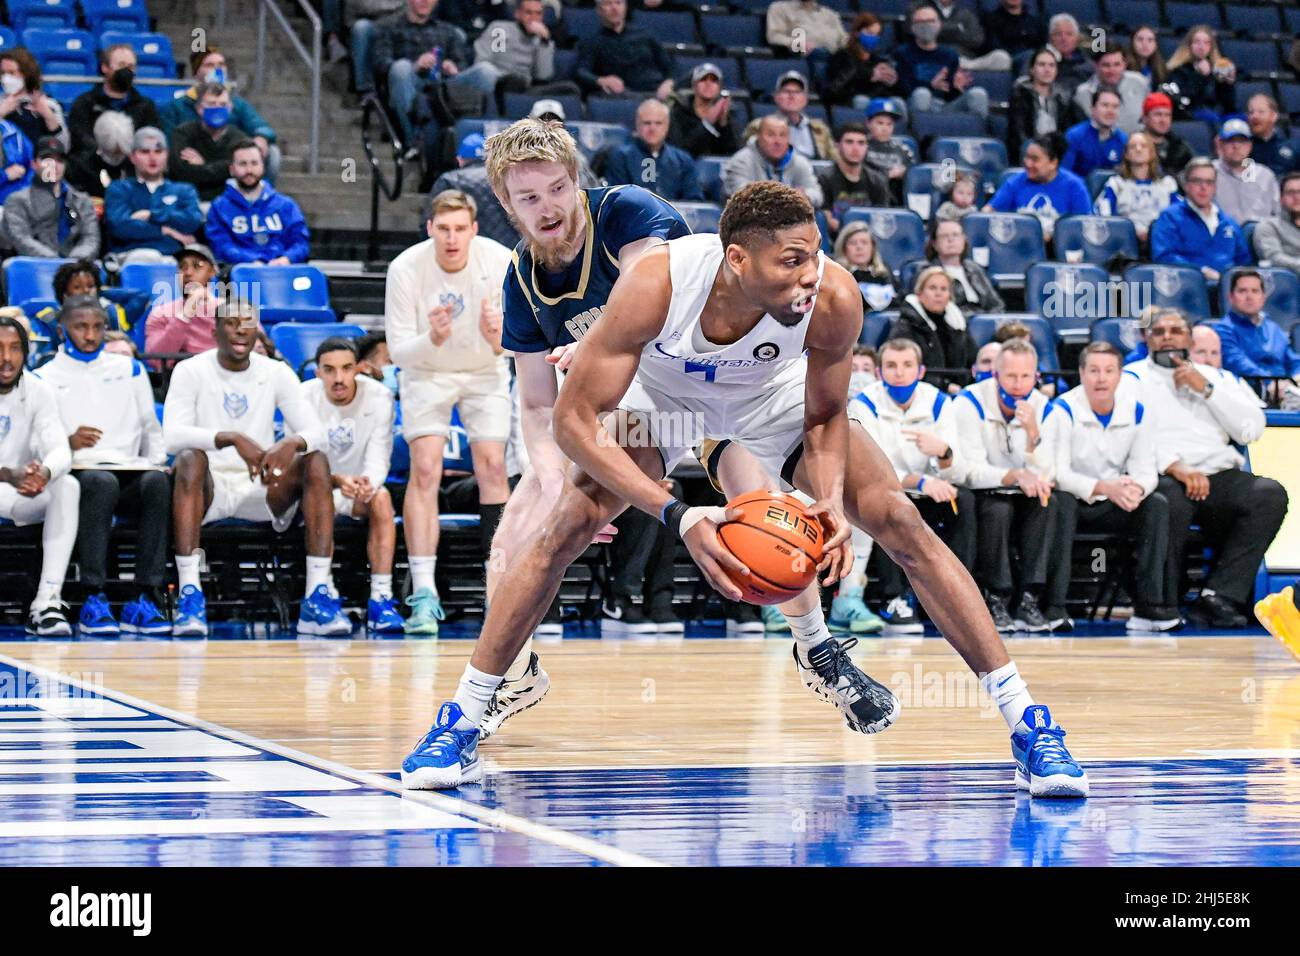 January 26, 2022: Saint Louis Billikens forward Francis Okoro (5) grabs a loose ball but steps out of bounds turning the ball over in an A-10 conference game where the George Washington Colonials visited the St. Louis Billikens. Held at Chaifetz Arena in St. Louis, MO Richard Ulreich/CSM Stock Photo